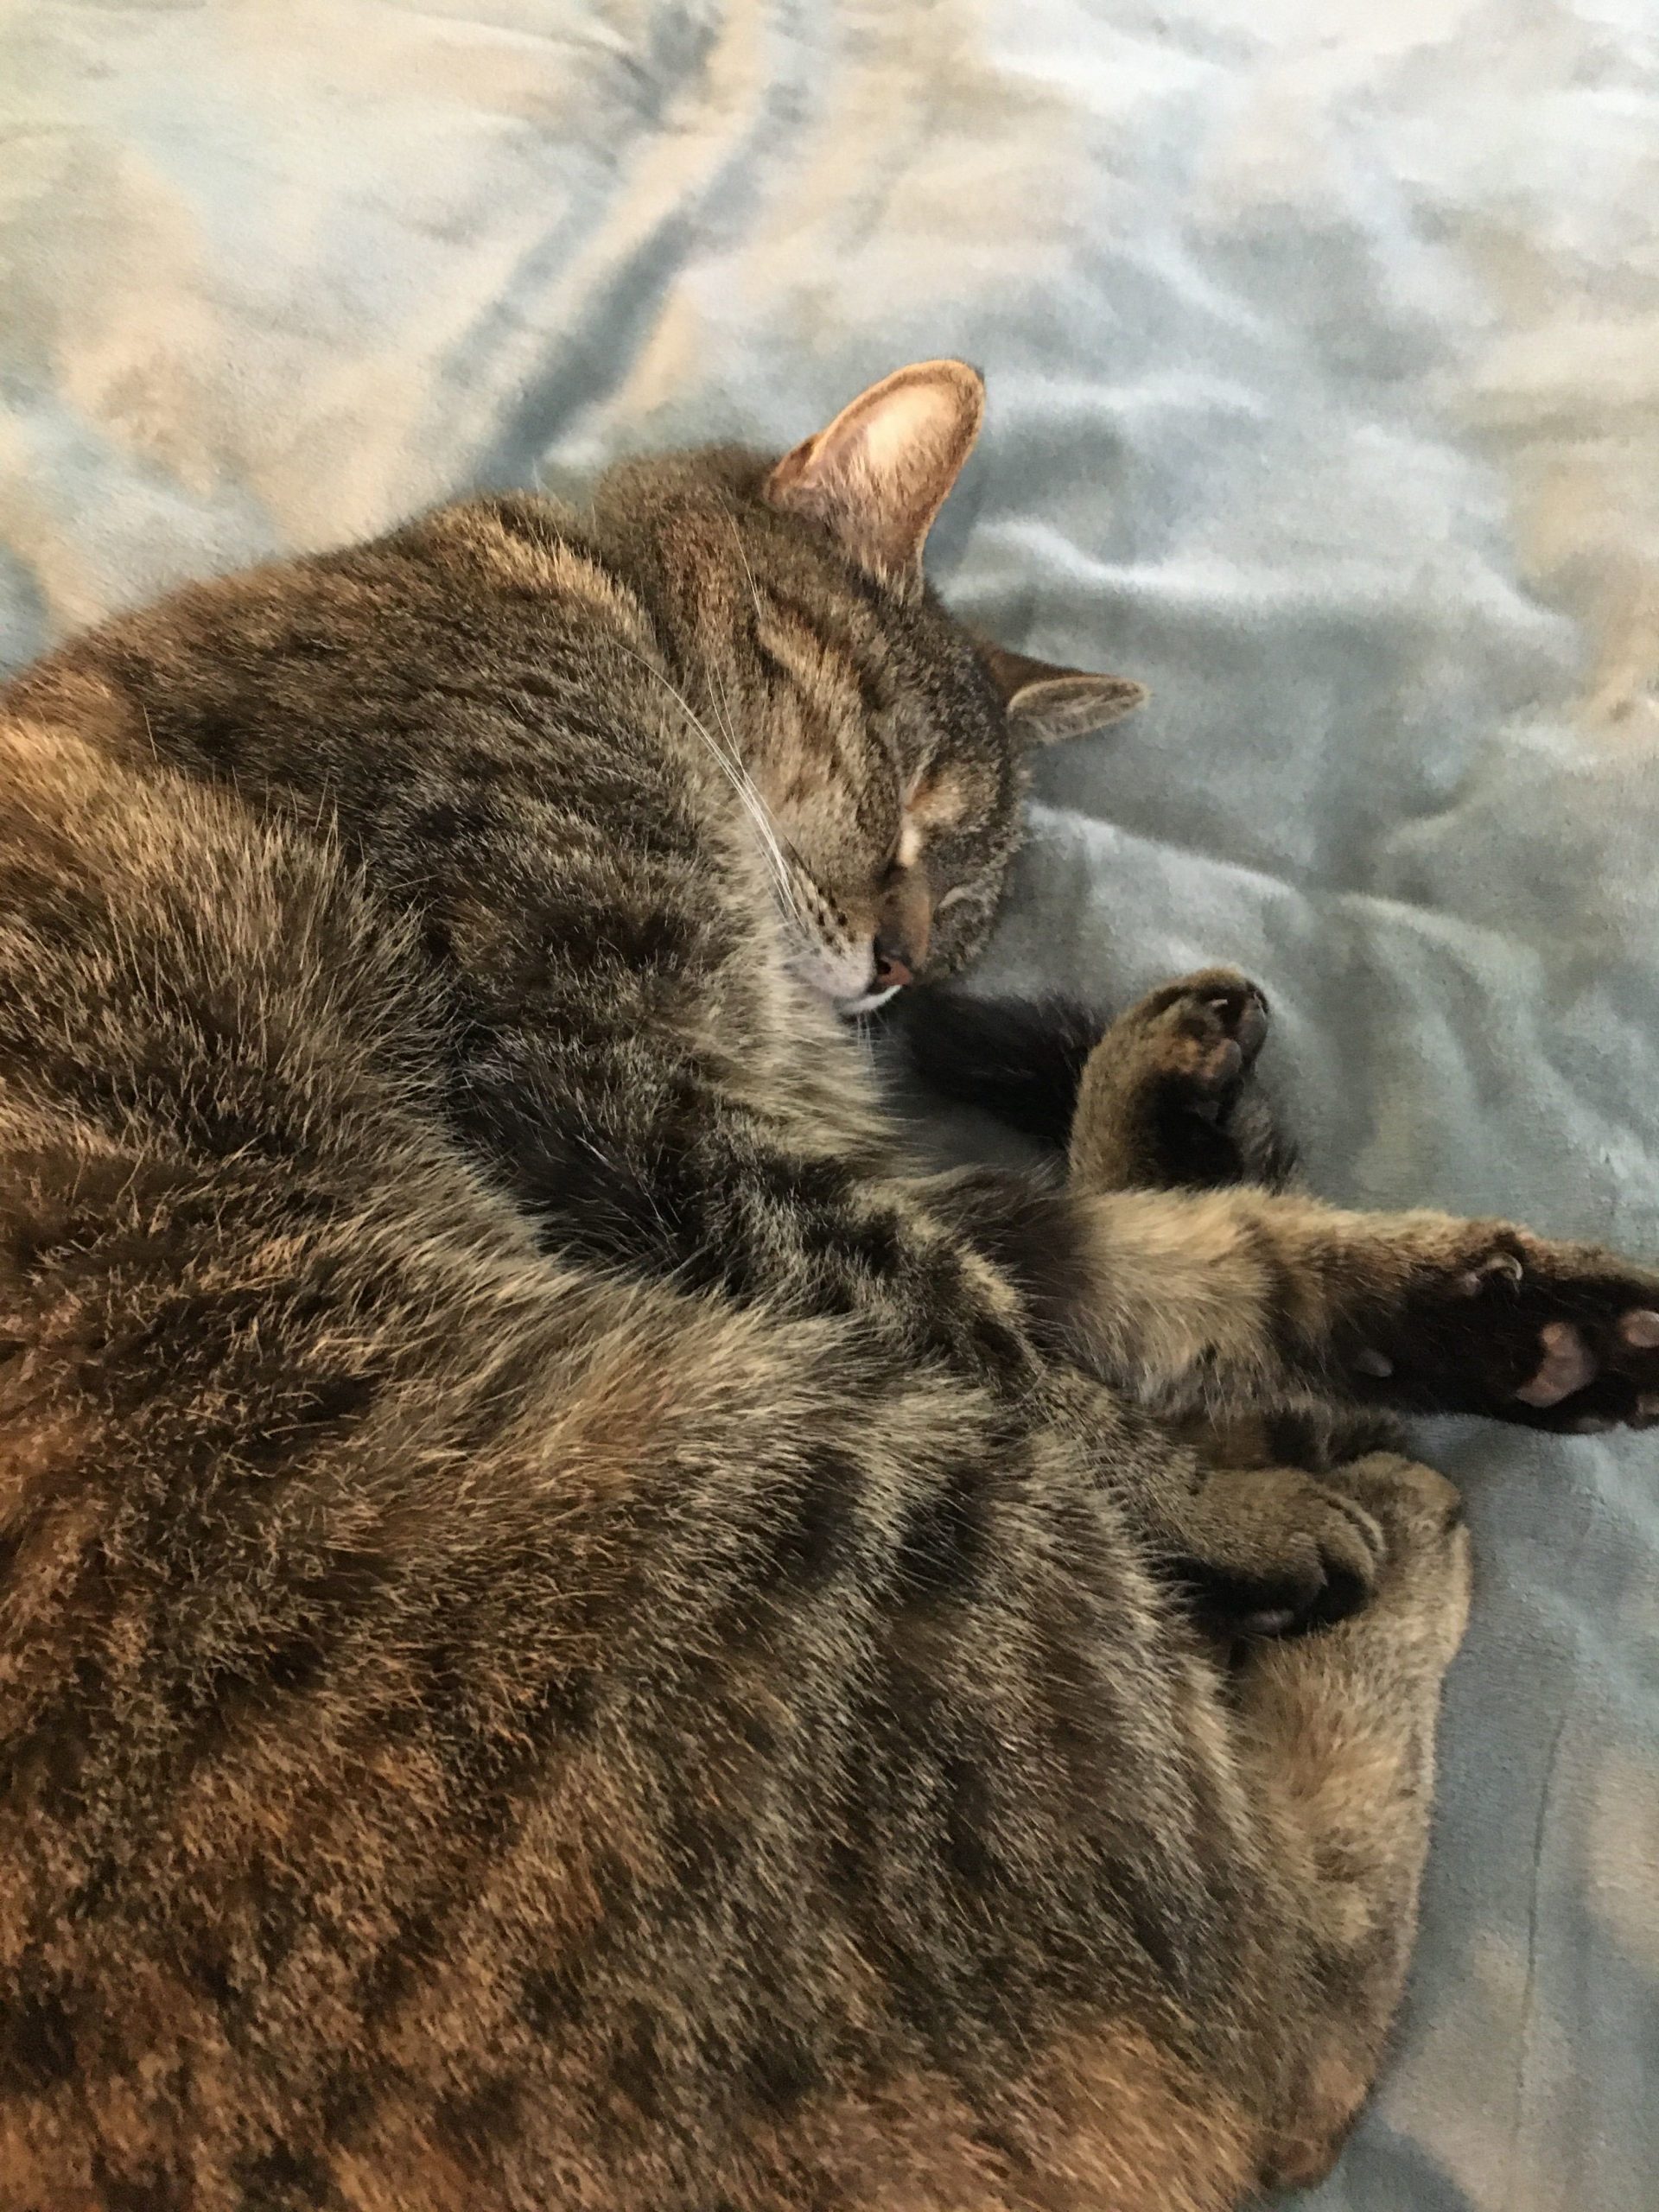 A photo of a brown striped tabby cat curled up and asleep.